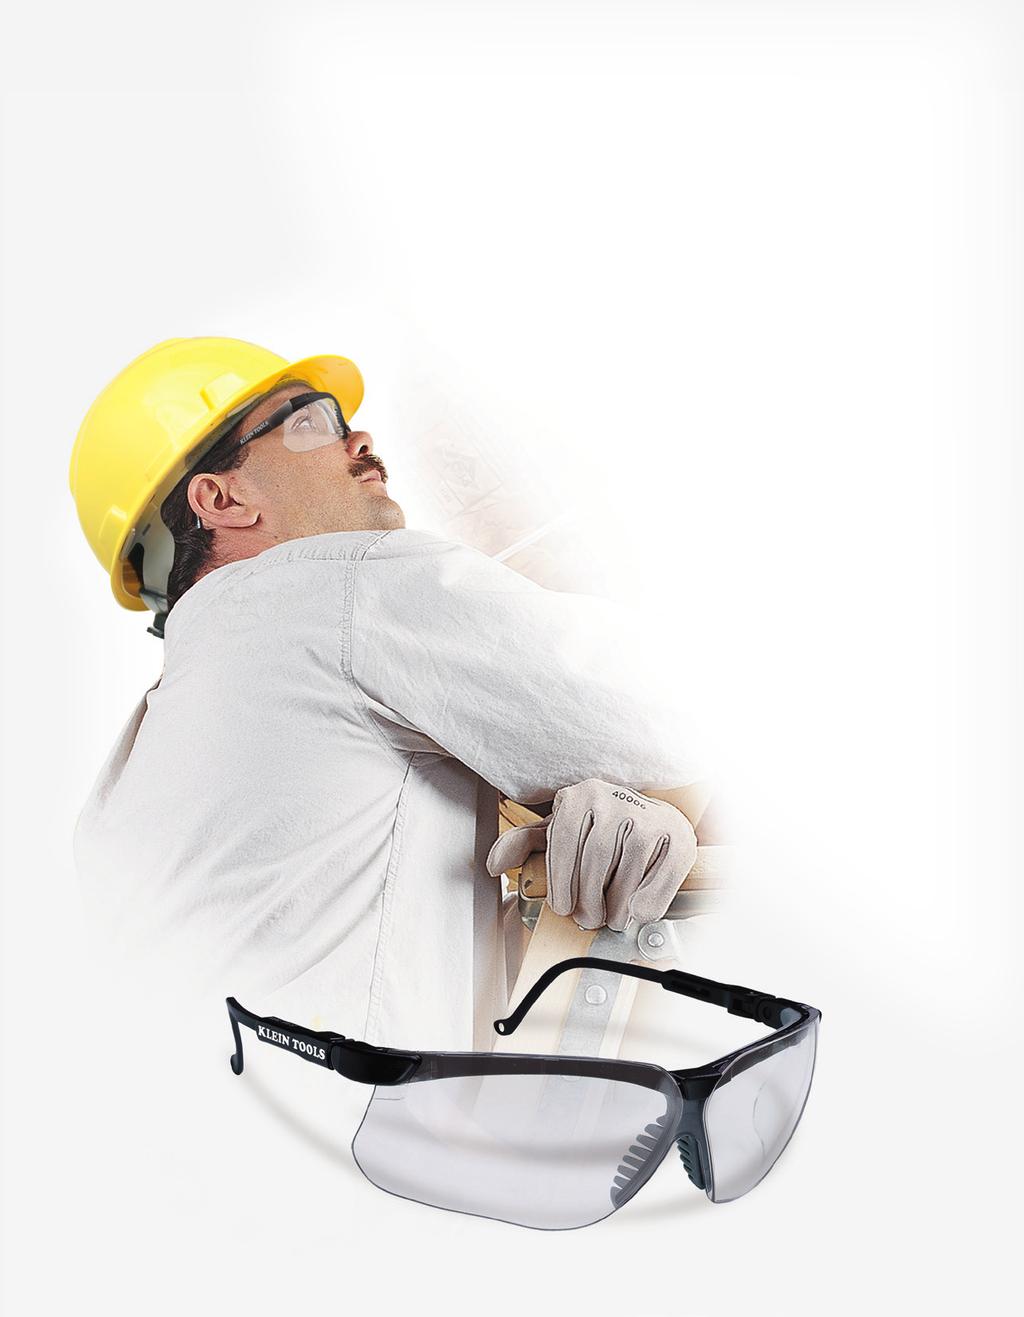 Personal Protective Equipment & Safety Products Klein Tools provides personal protective